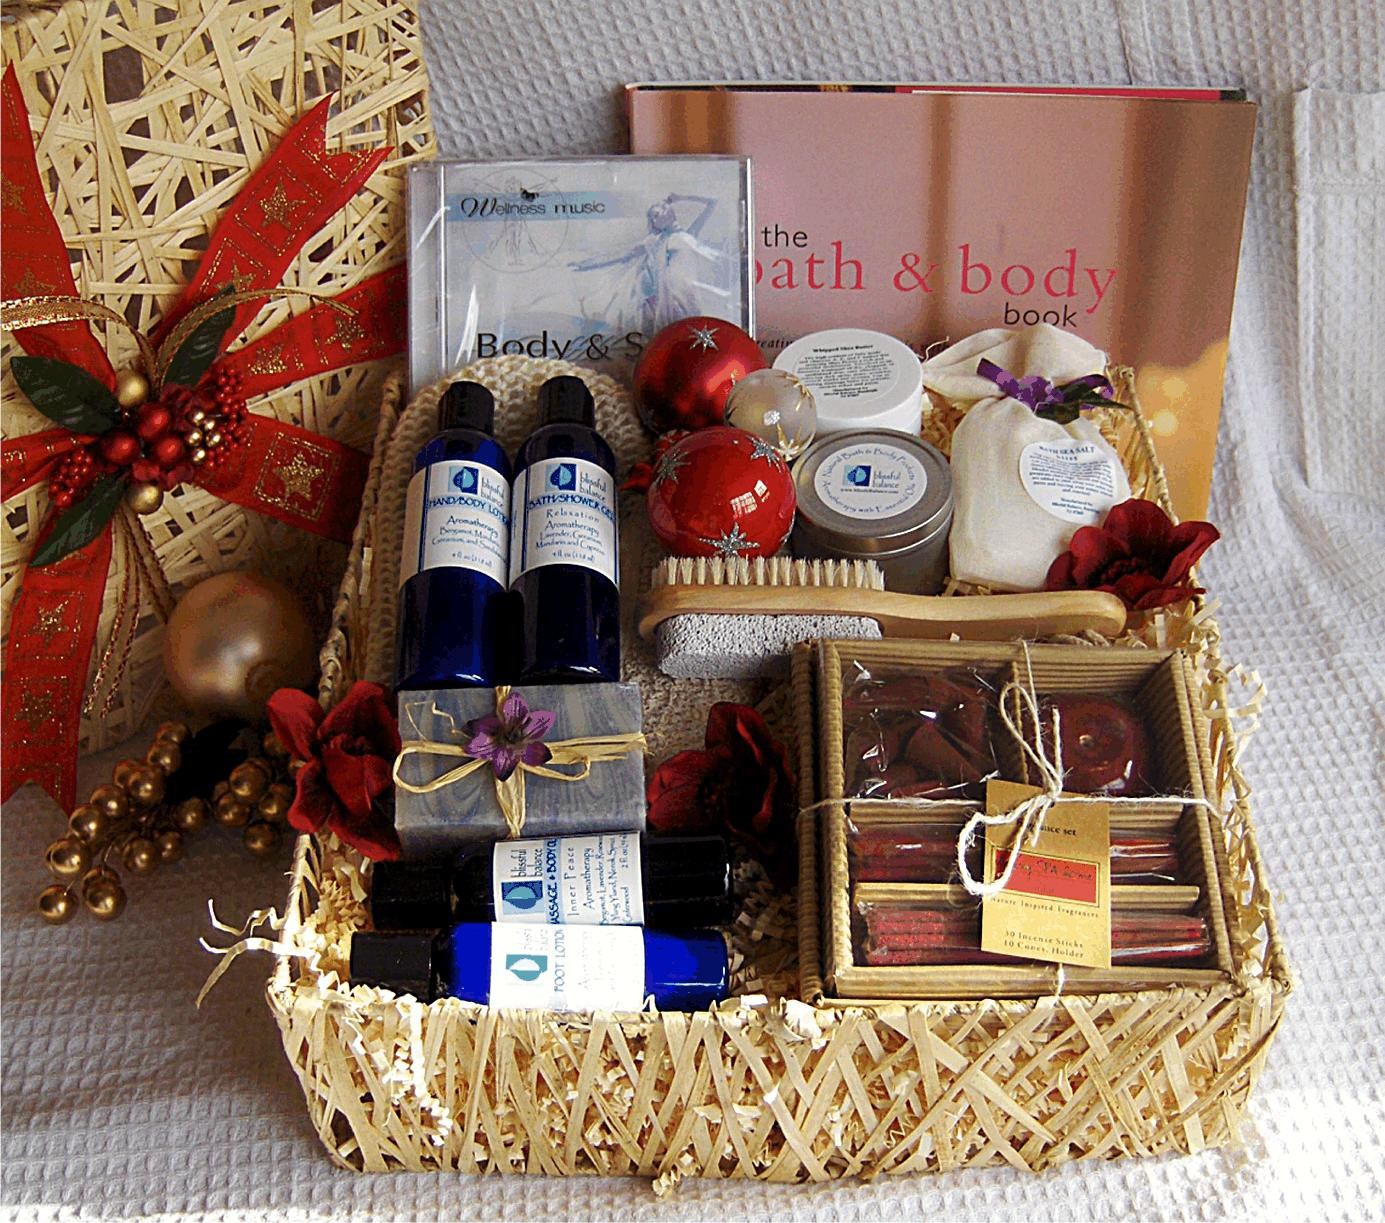 Great Gift Basket Ideas
 13 Gift Basket Ideas For Your Great Gifts Women wellness